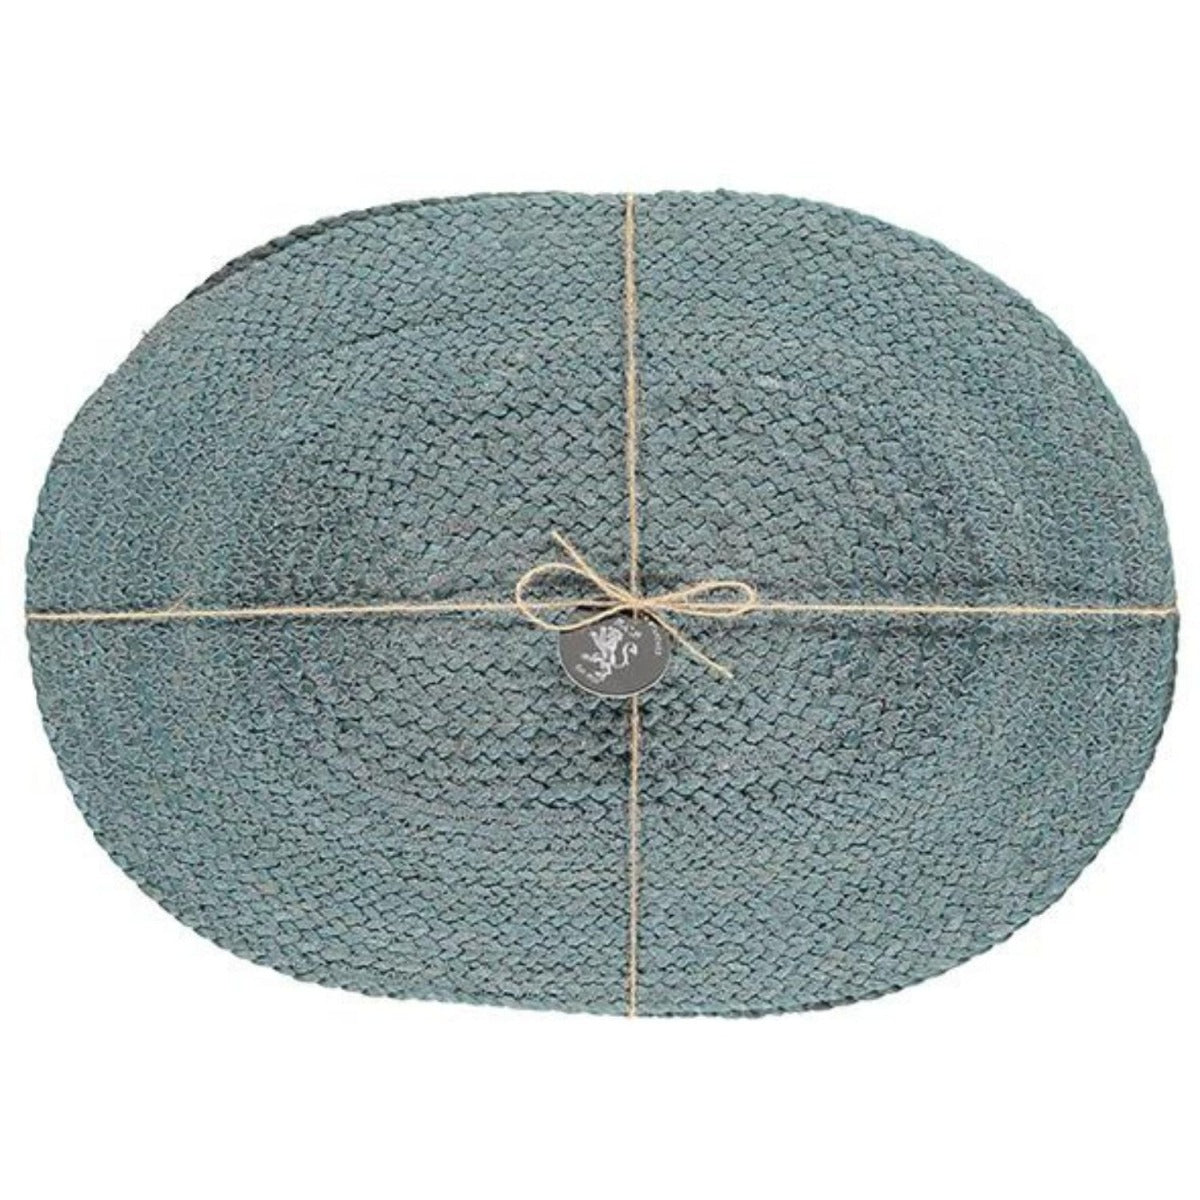 Handwoven Silky Jute Oval Placemat, Set of 4